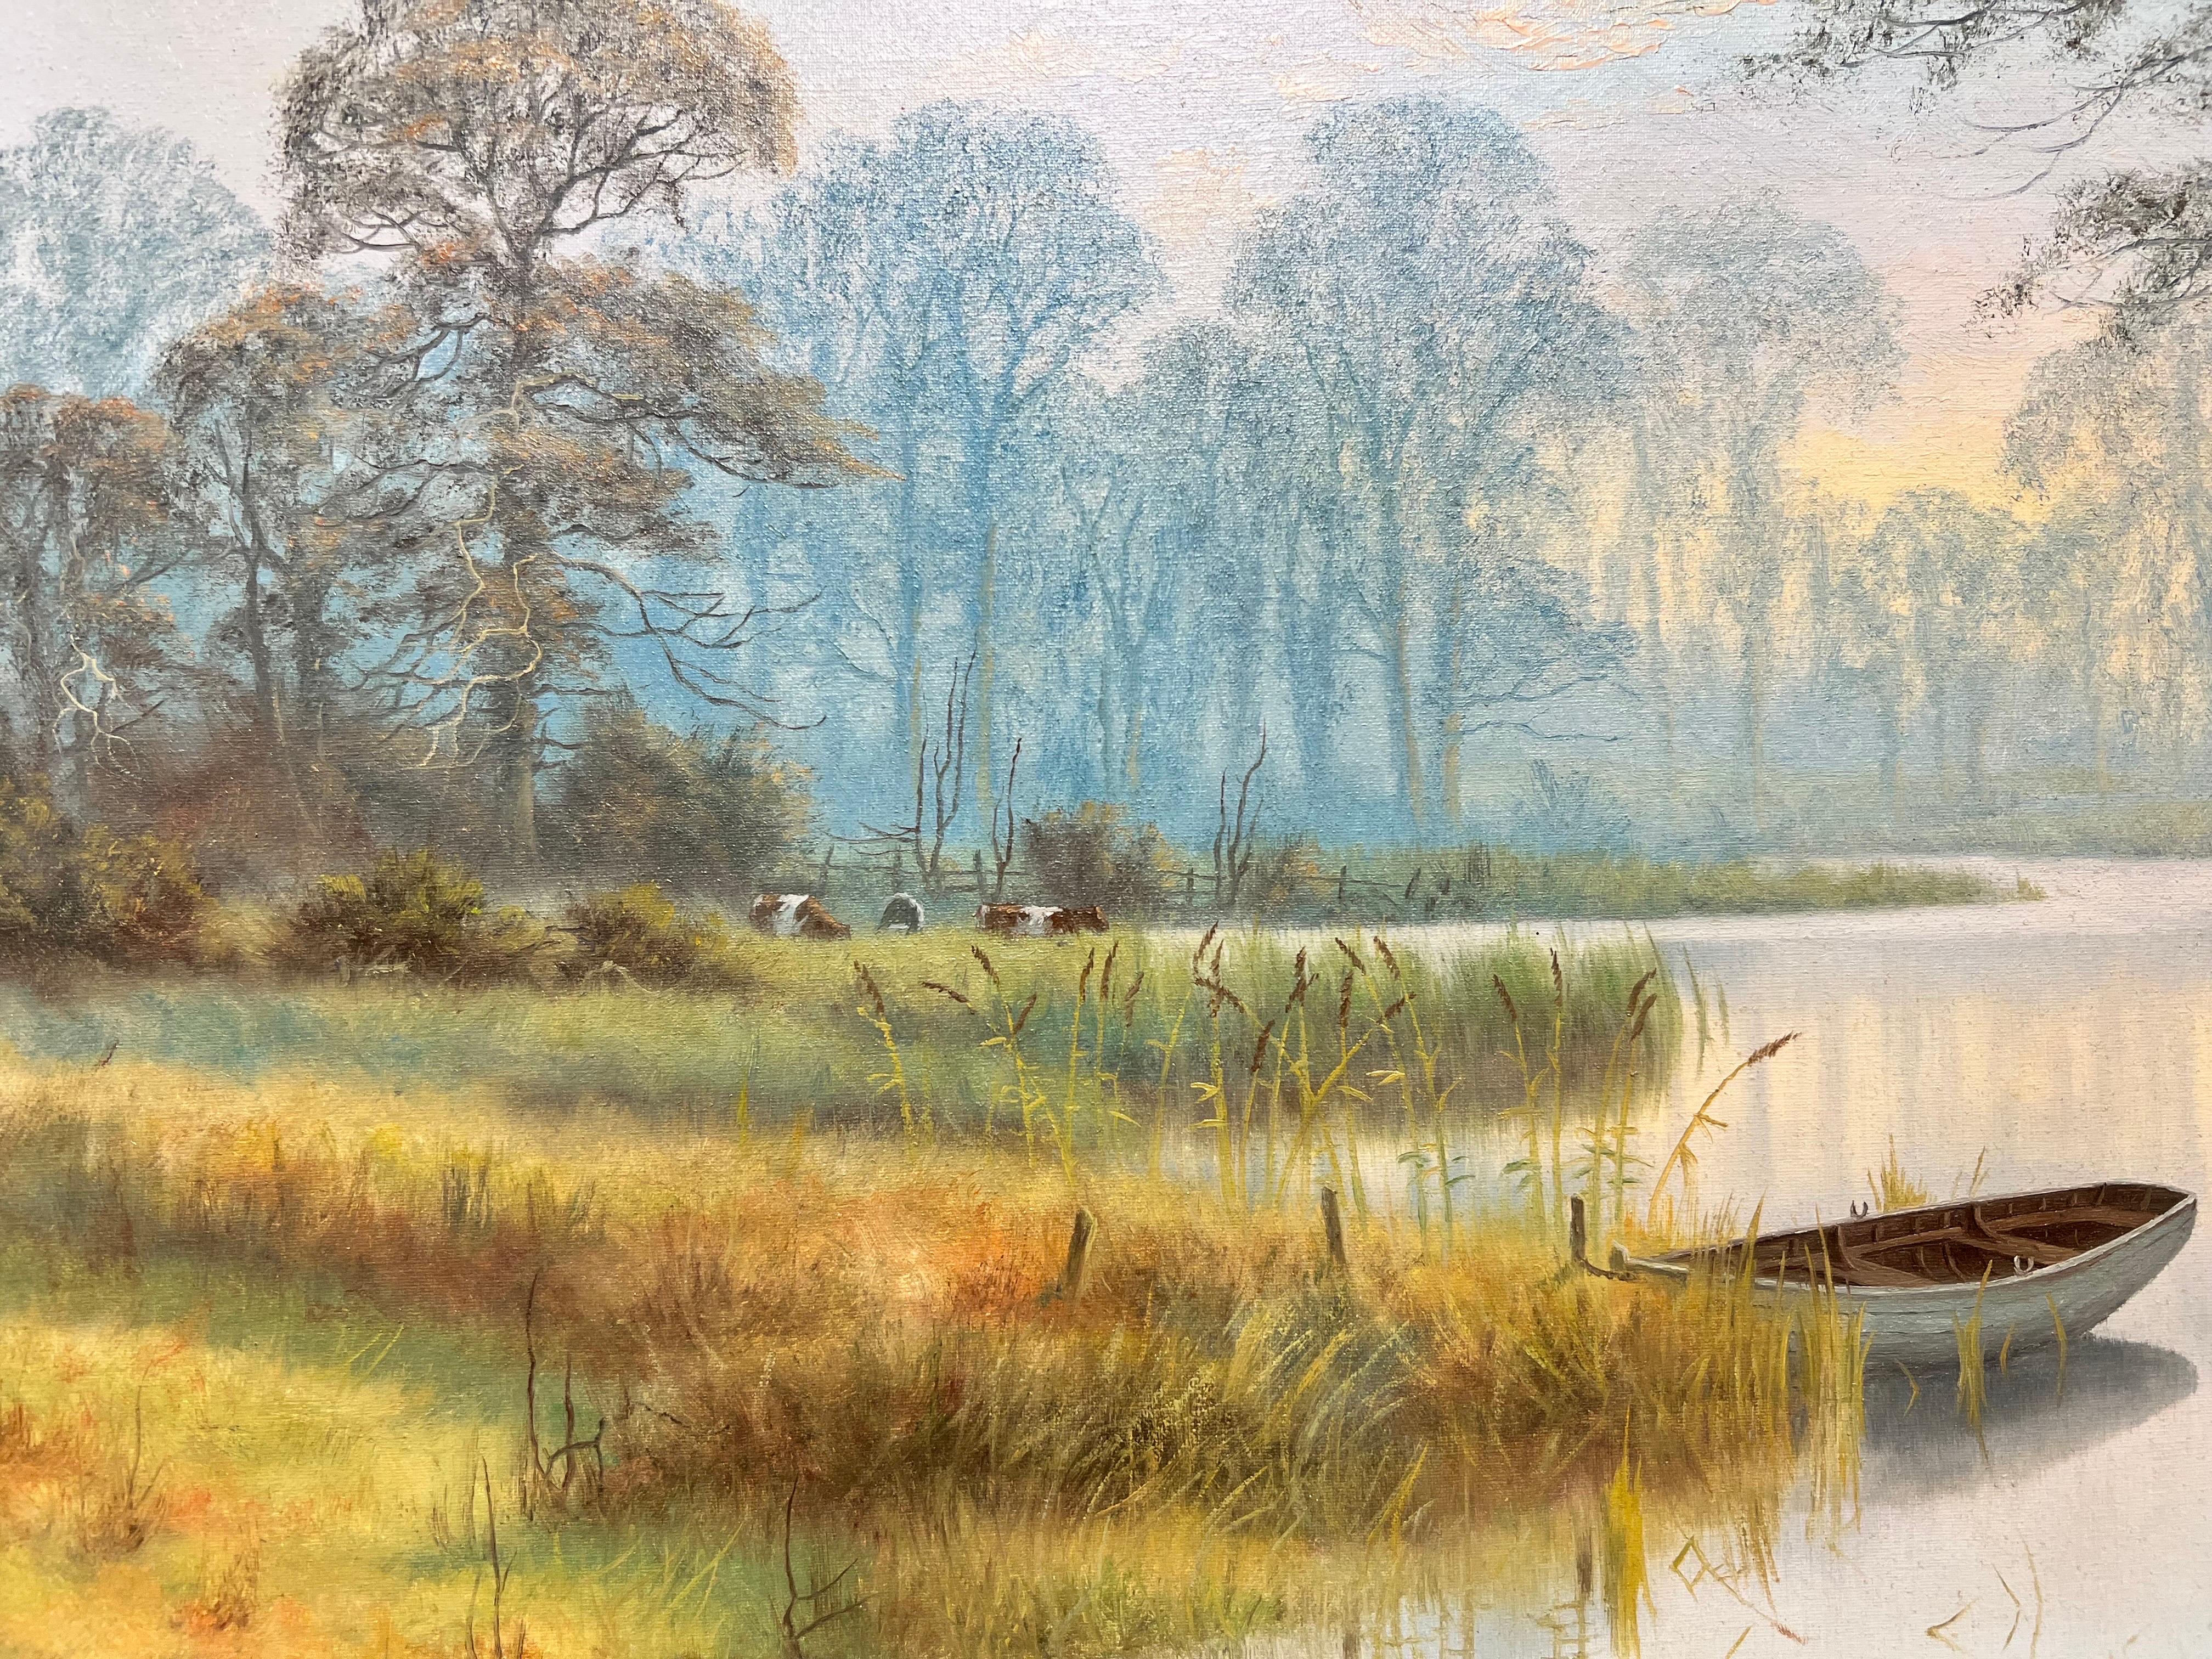 Sunrise over Tranquil River Landscape with Cattle Grazing in Meadows English Oil - Painting by Spencer Coleman